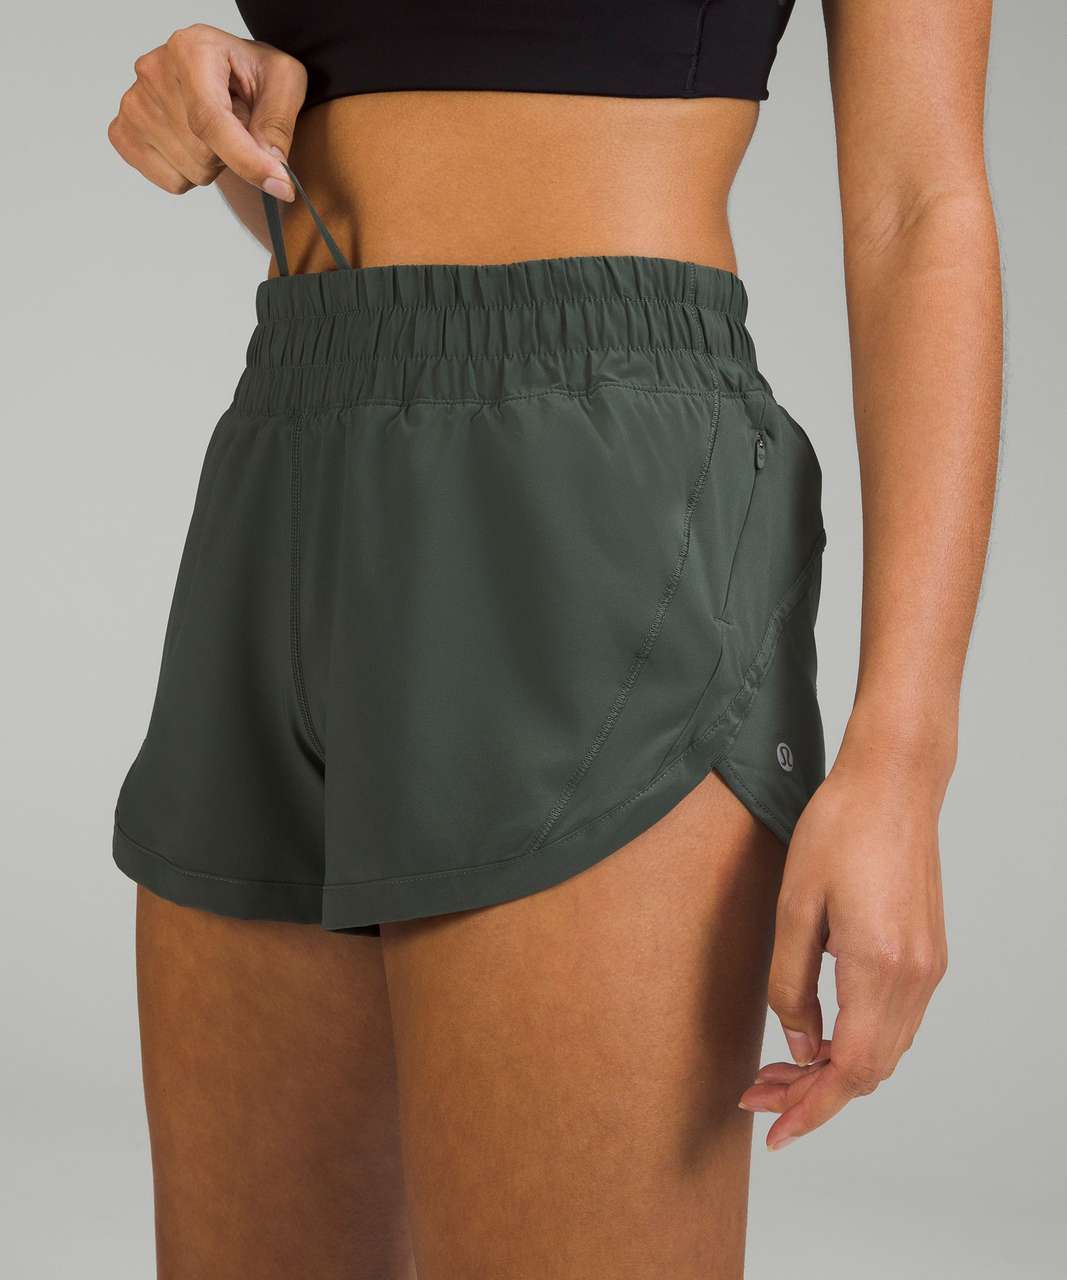 Lululemon Track That High-Rise Lined Short 3" - Smoked Spruce